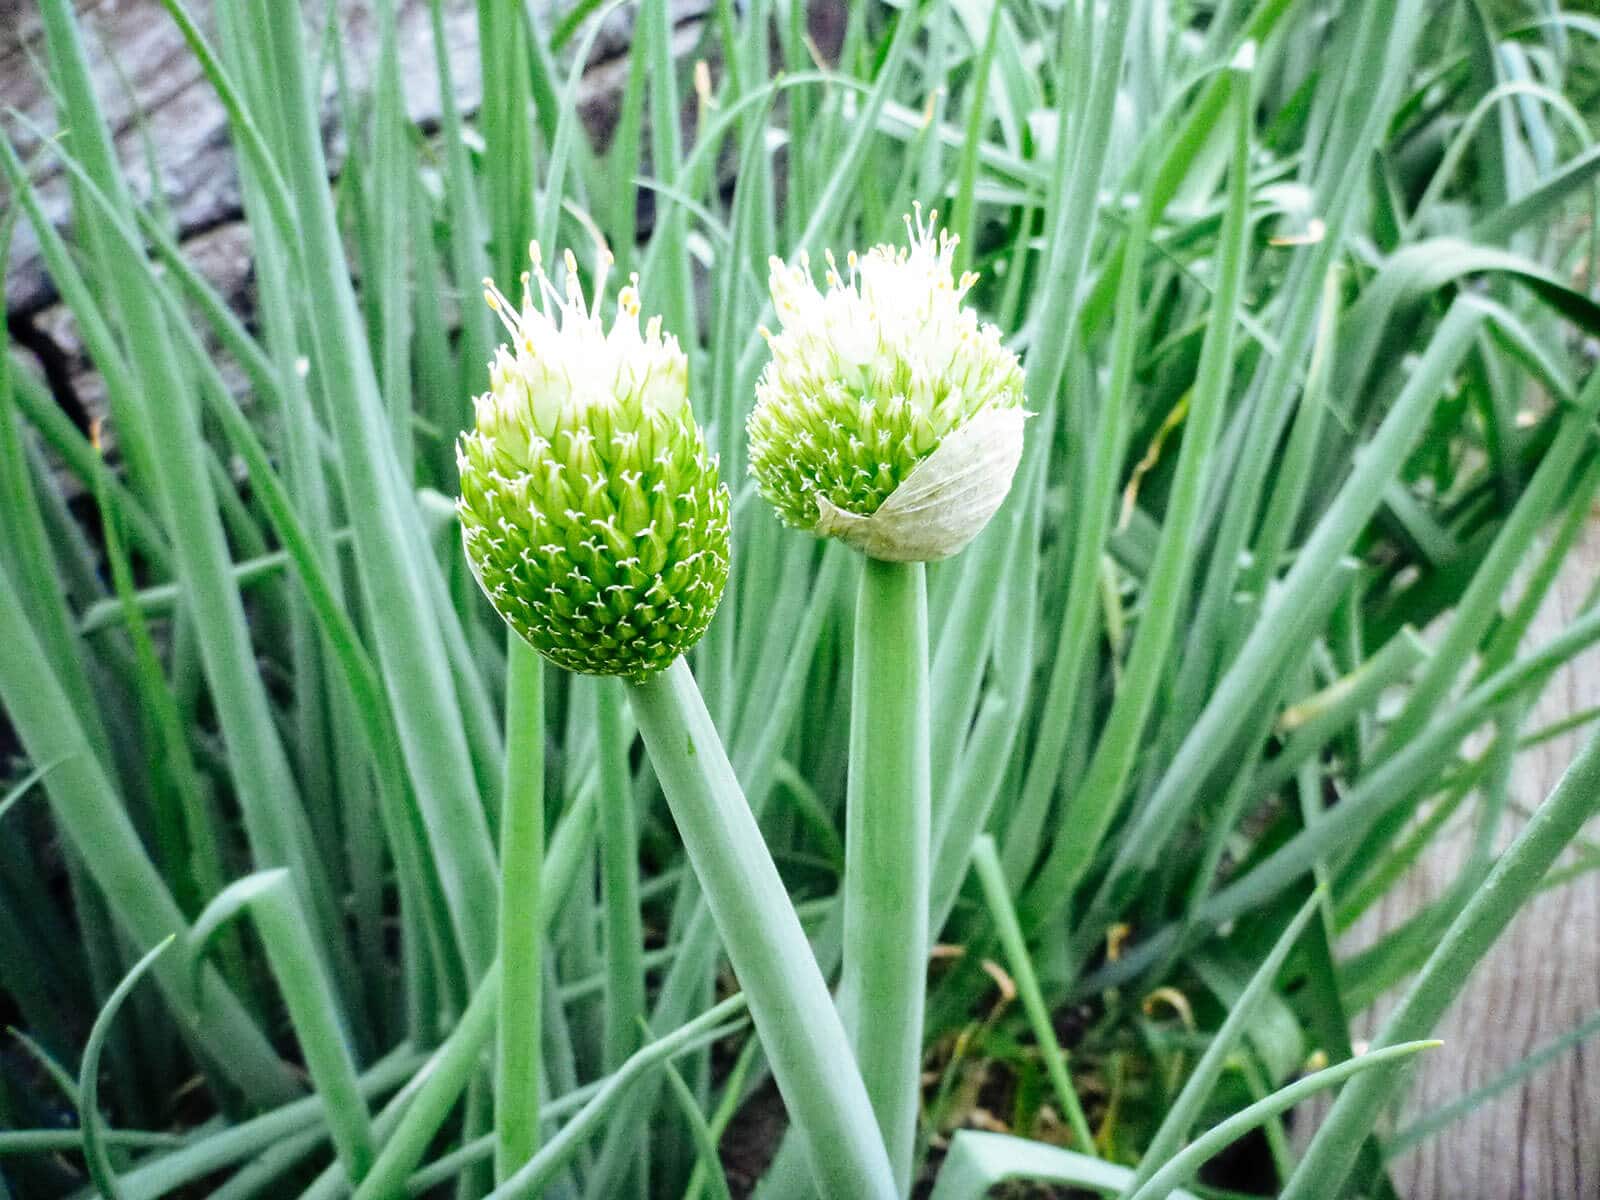 Two onion flowers